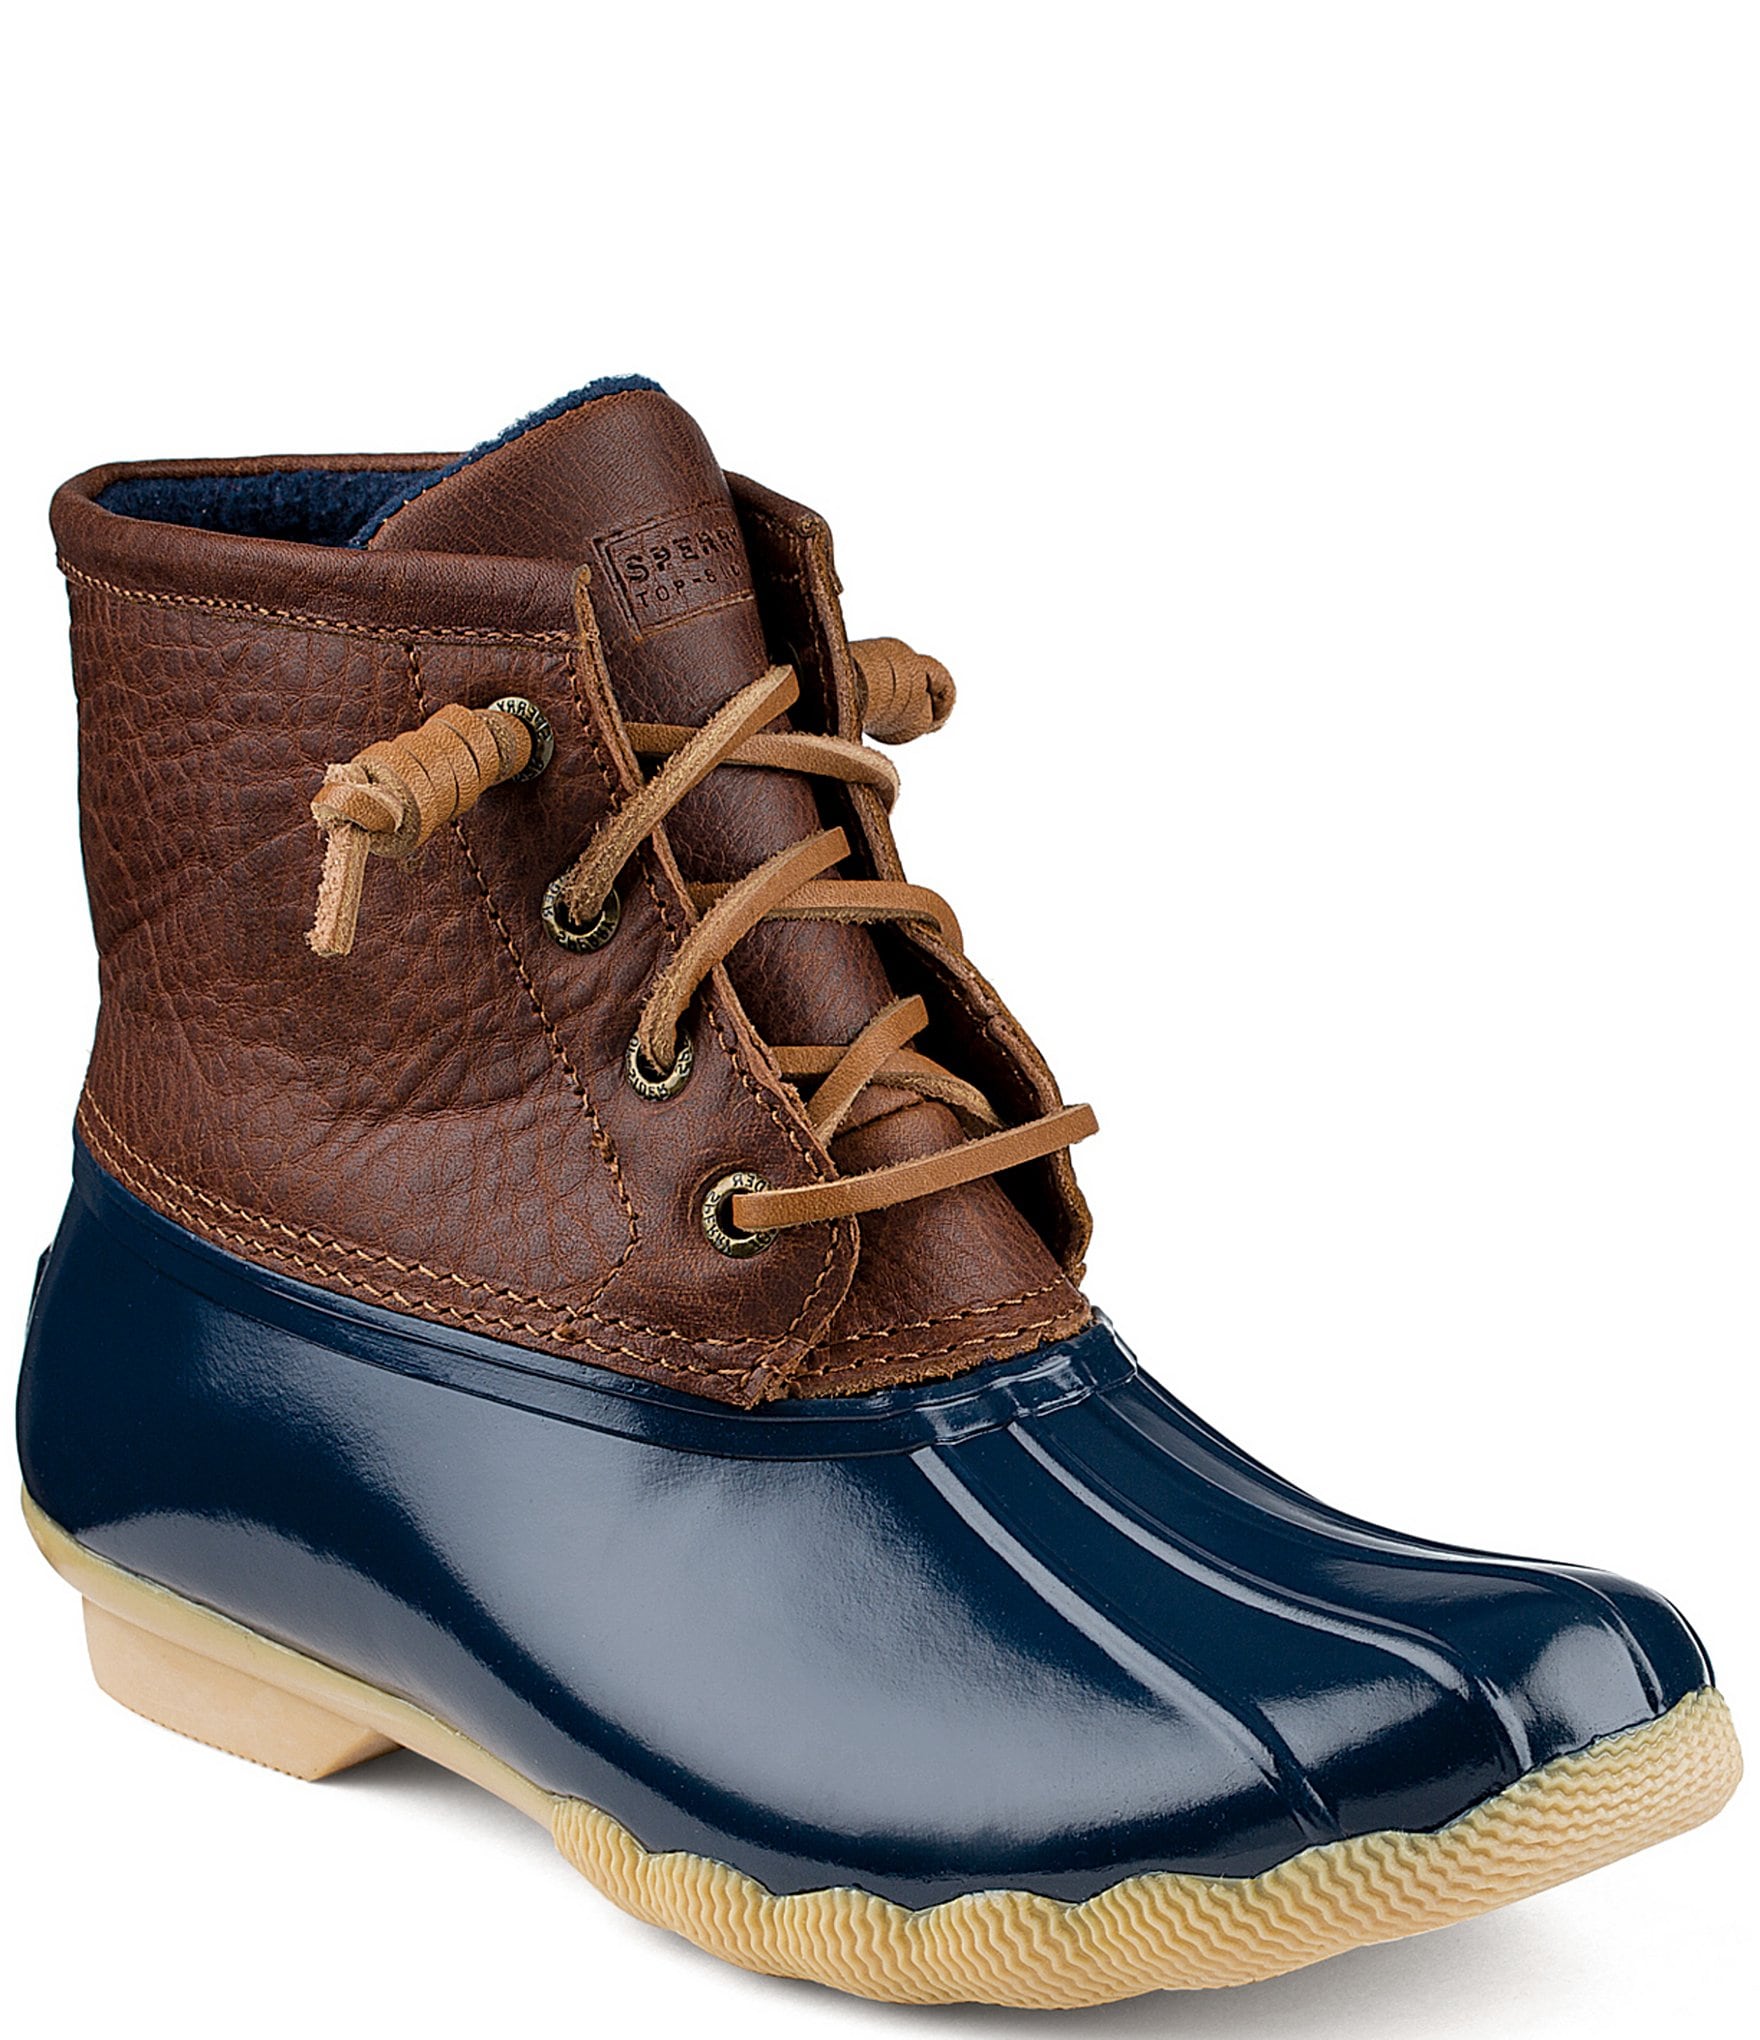 navy blue wide width shoes